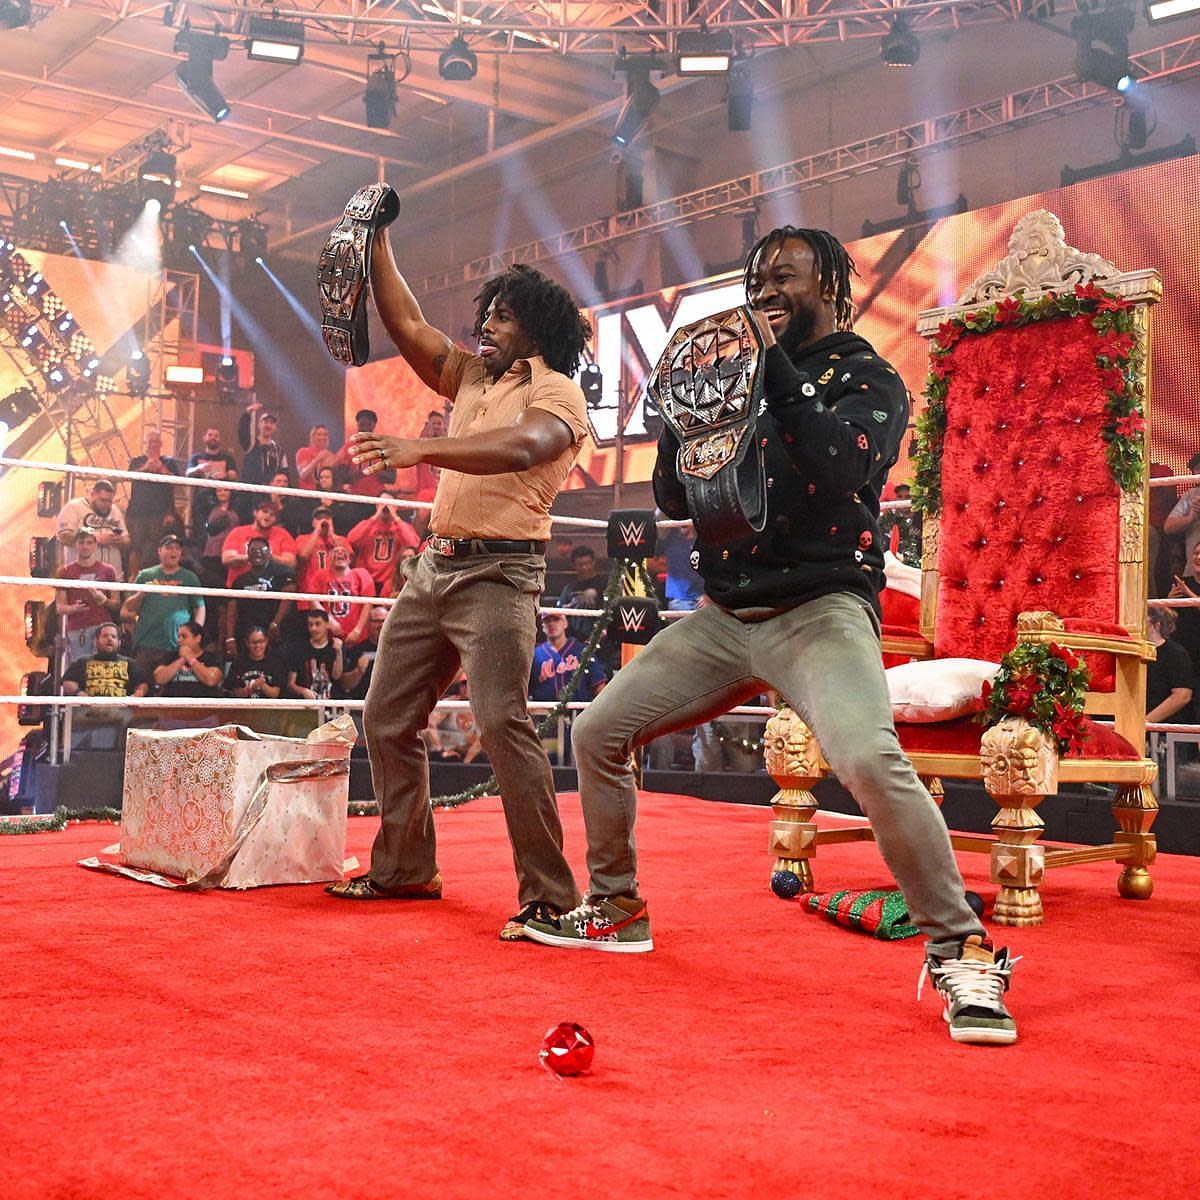 Can Kofi Kingston and Xavier Woods add the NXT Tag Team titles to their trophy cases?